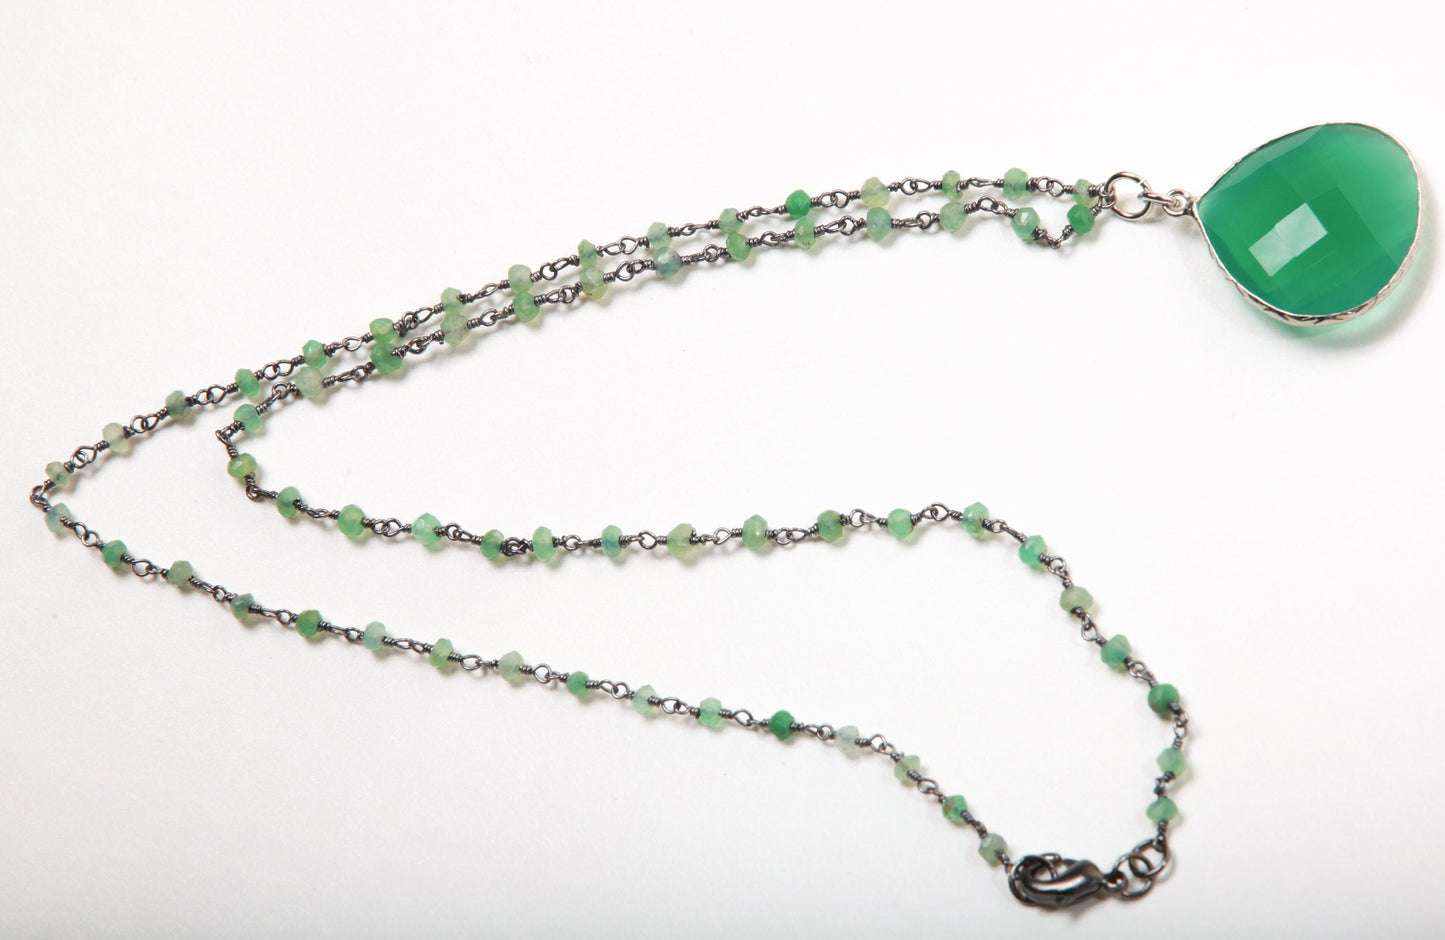 Genuine Green Onyx Bezel Teardrop Pendant with Oxidized Silver Wrapped Natural Green Onyx Beaded Chain Necklace. Gift for her